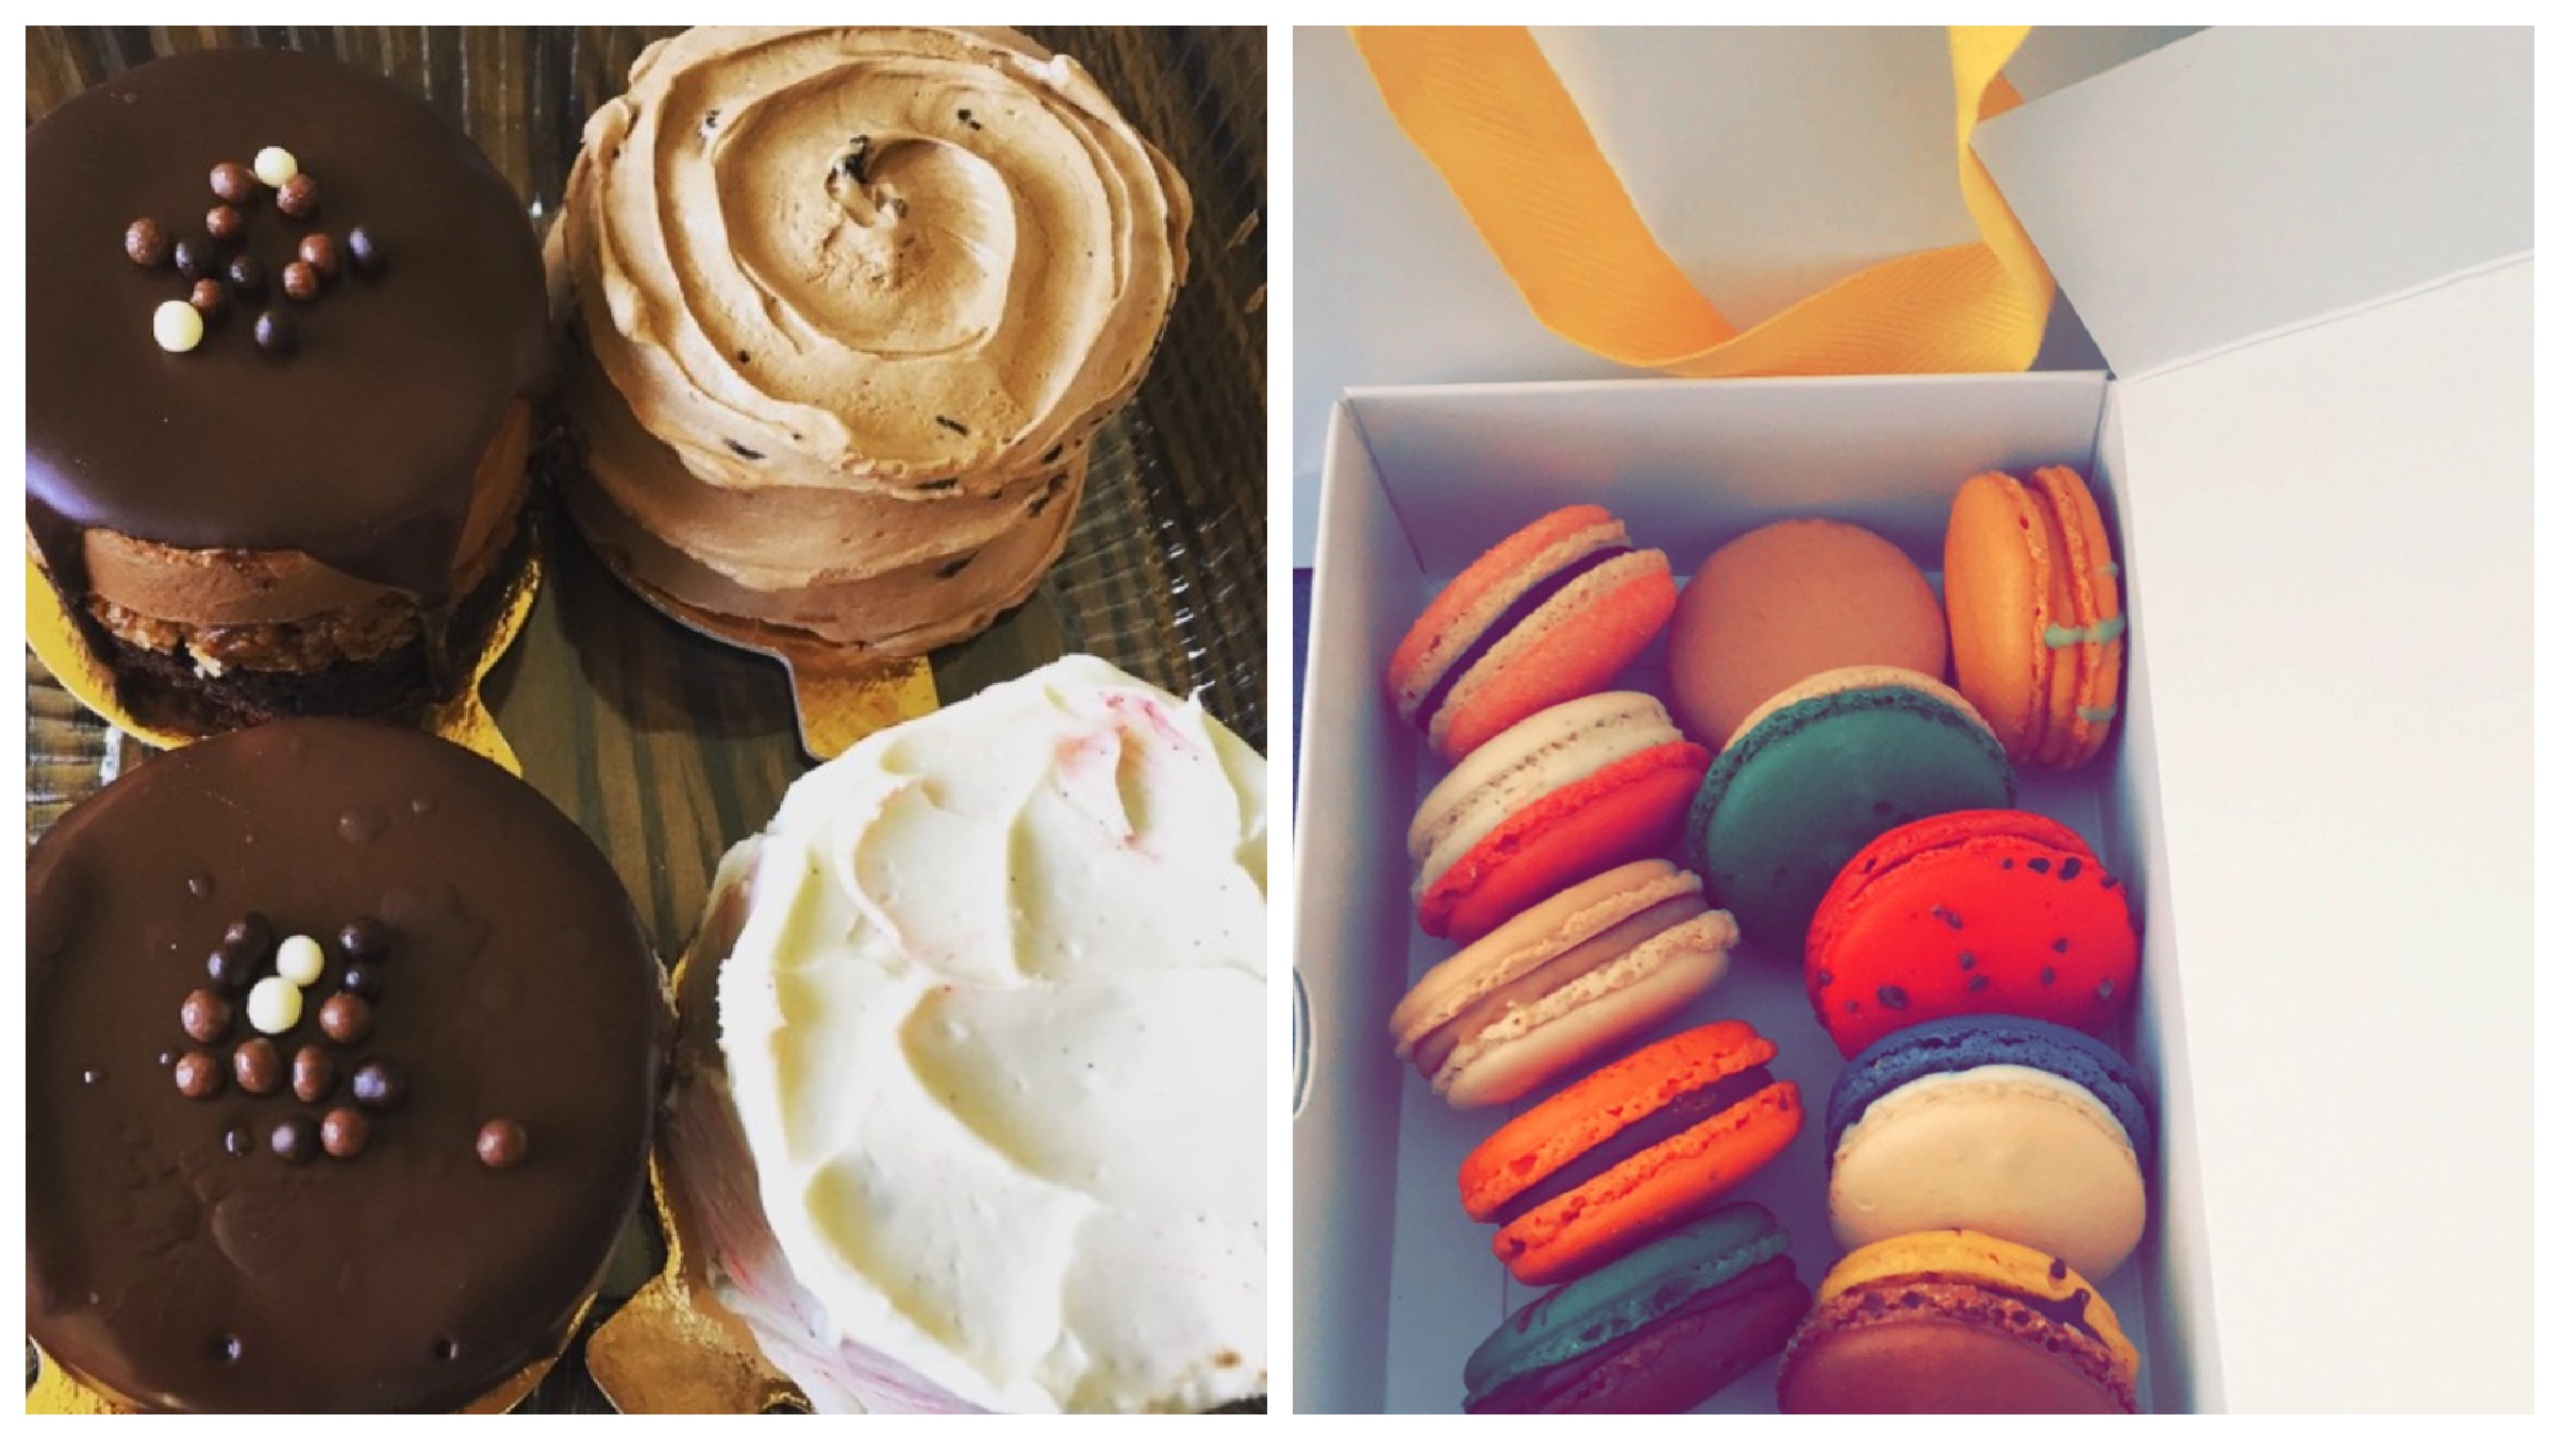 Cheat Days are infinitely better at these Calgary Sweet Shops!